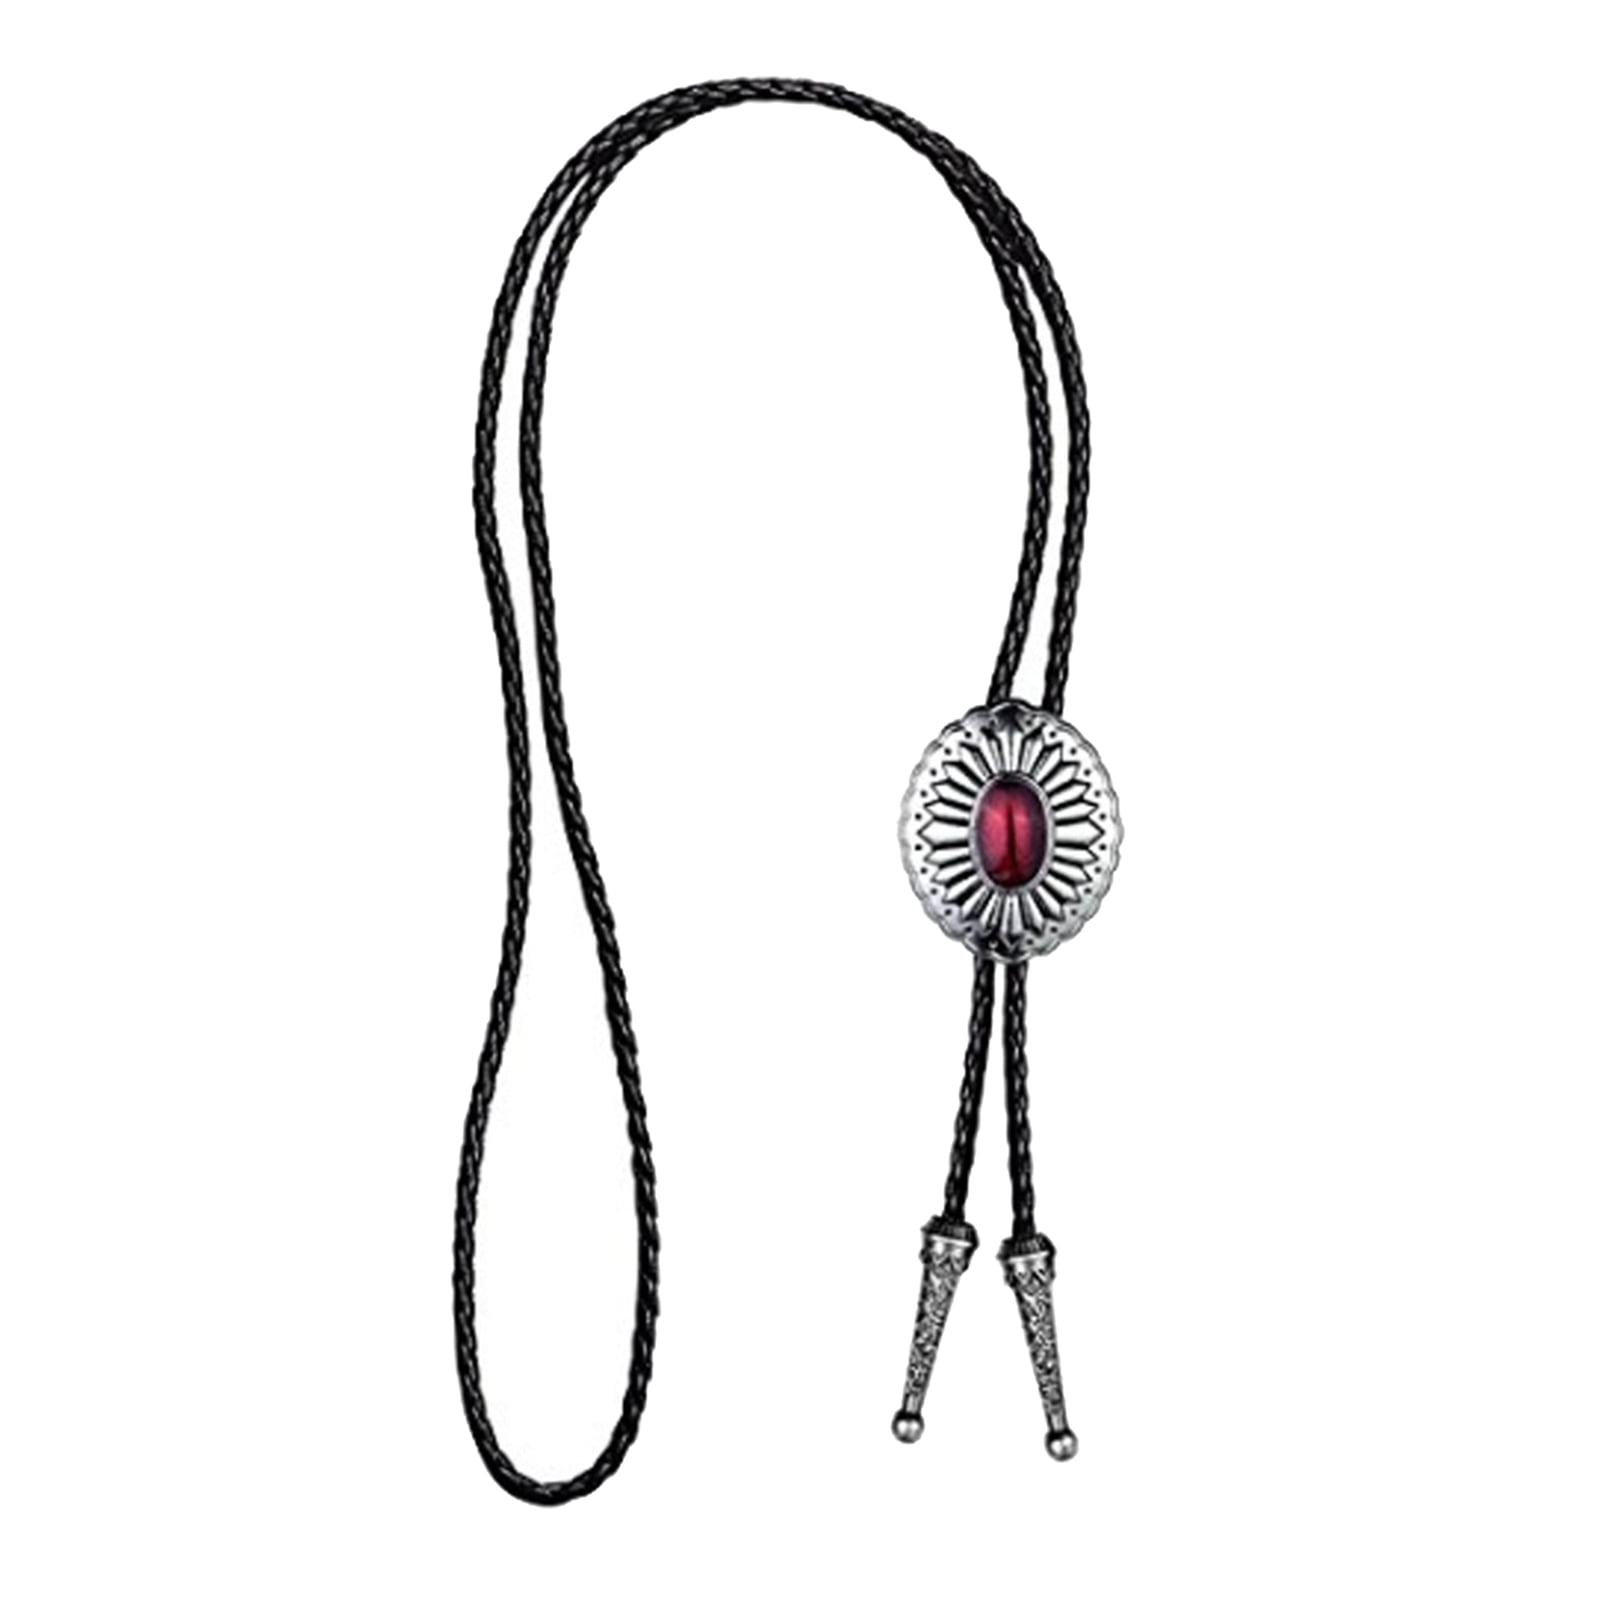 Original Western Bolo Tie Leather Necklace Mix Styles Choice also Stock in US 